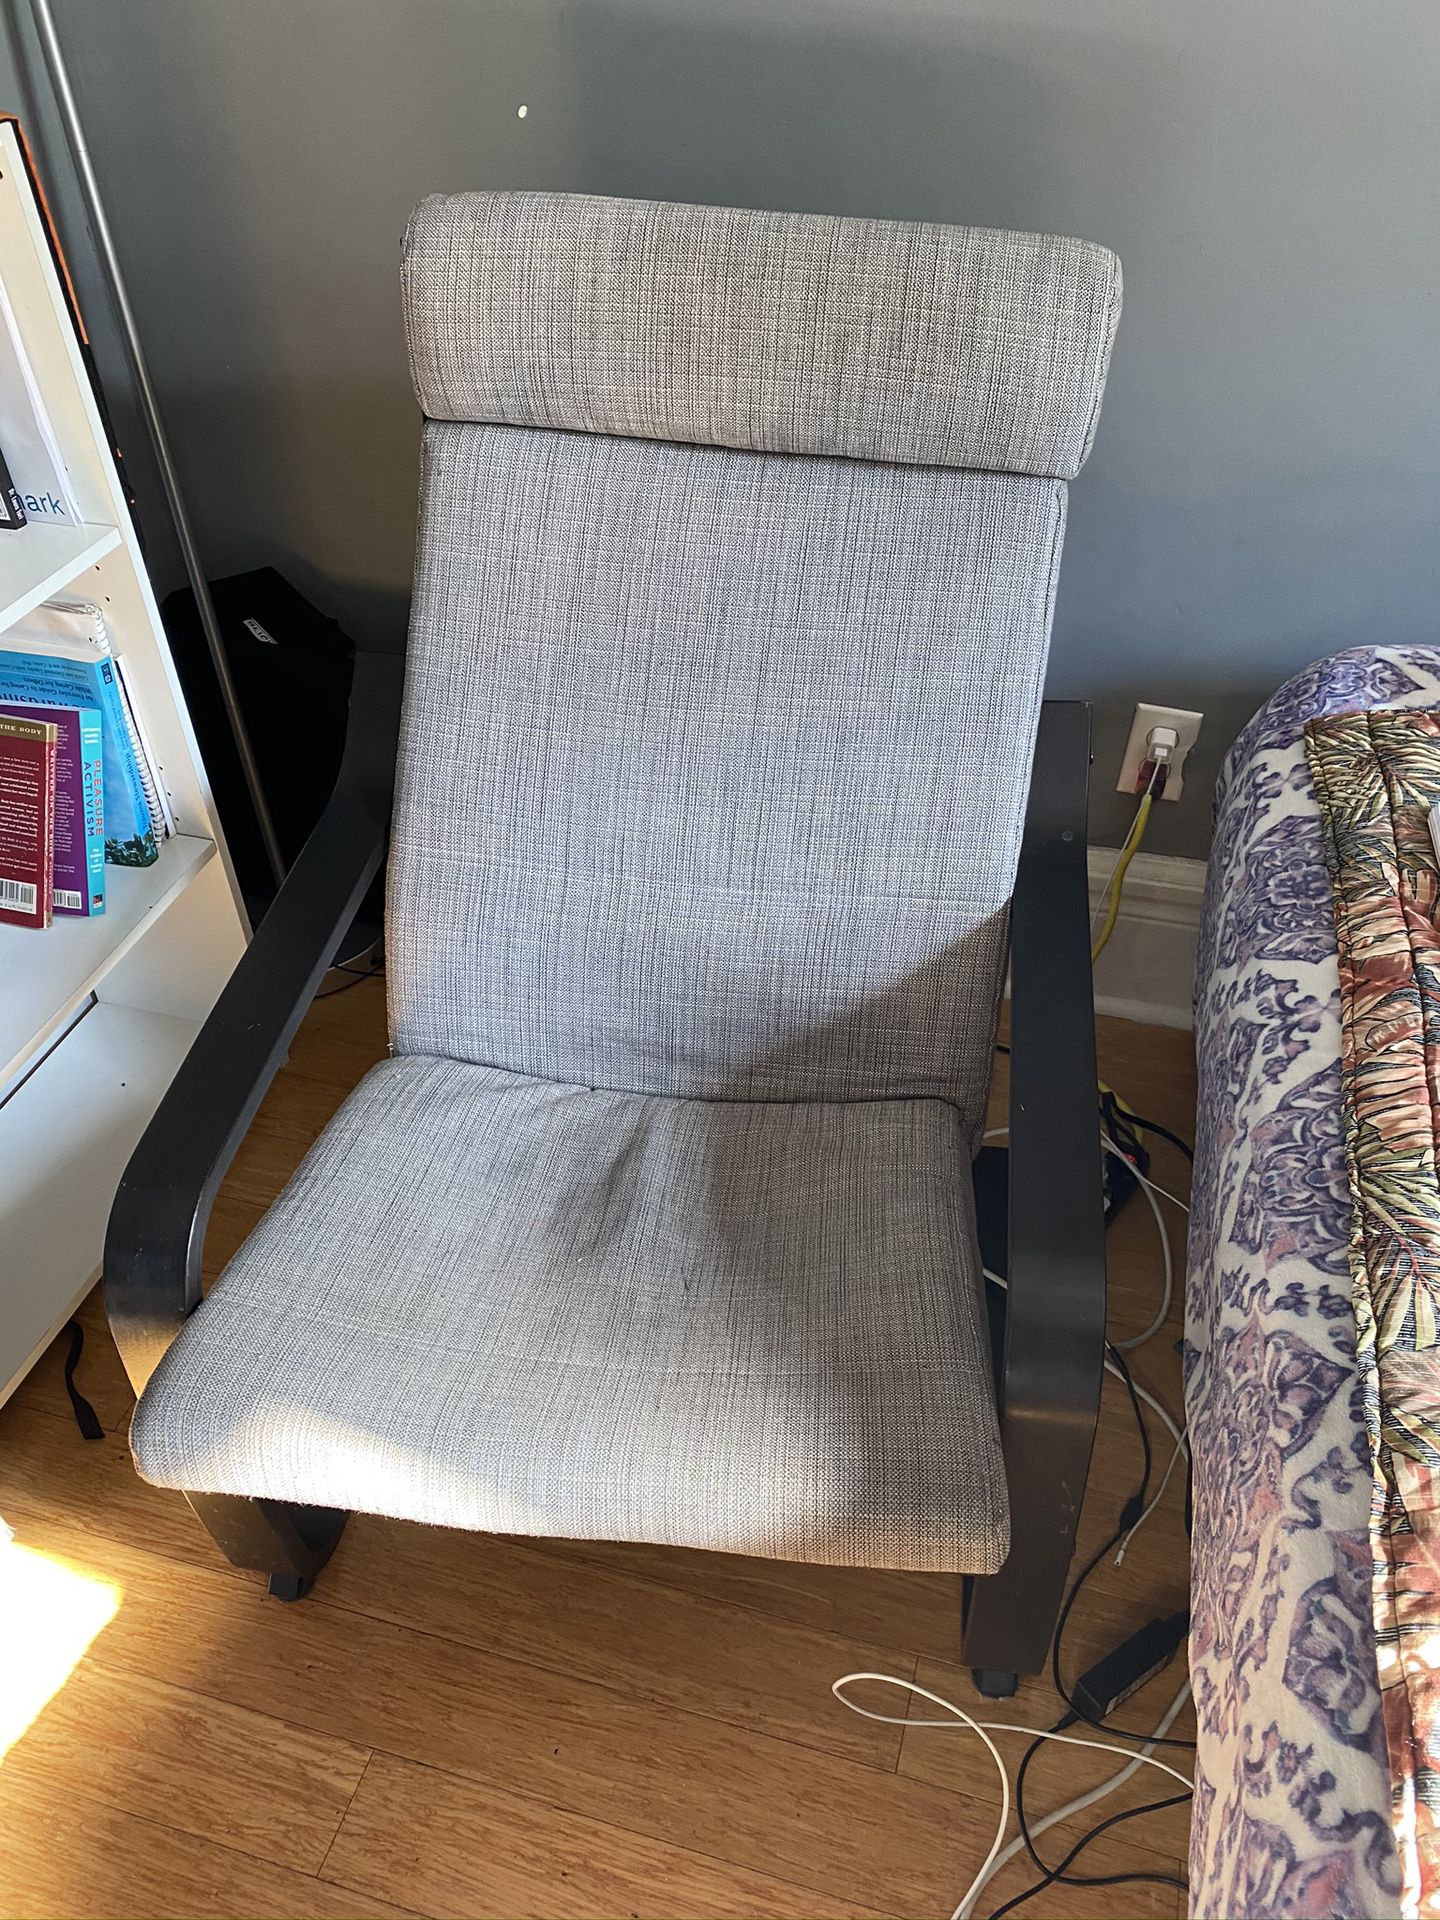 Chair (good condition) $20